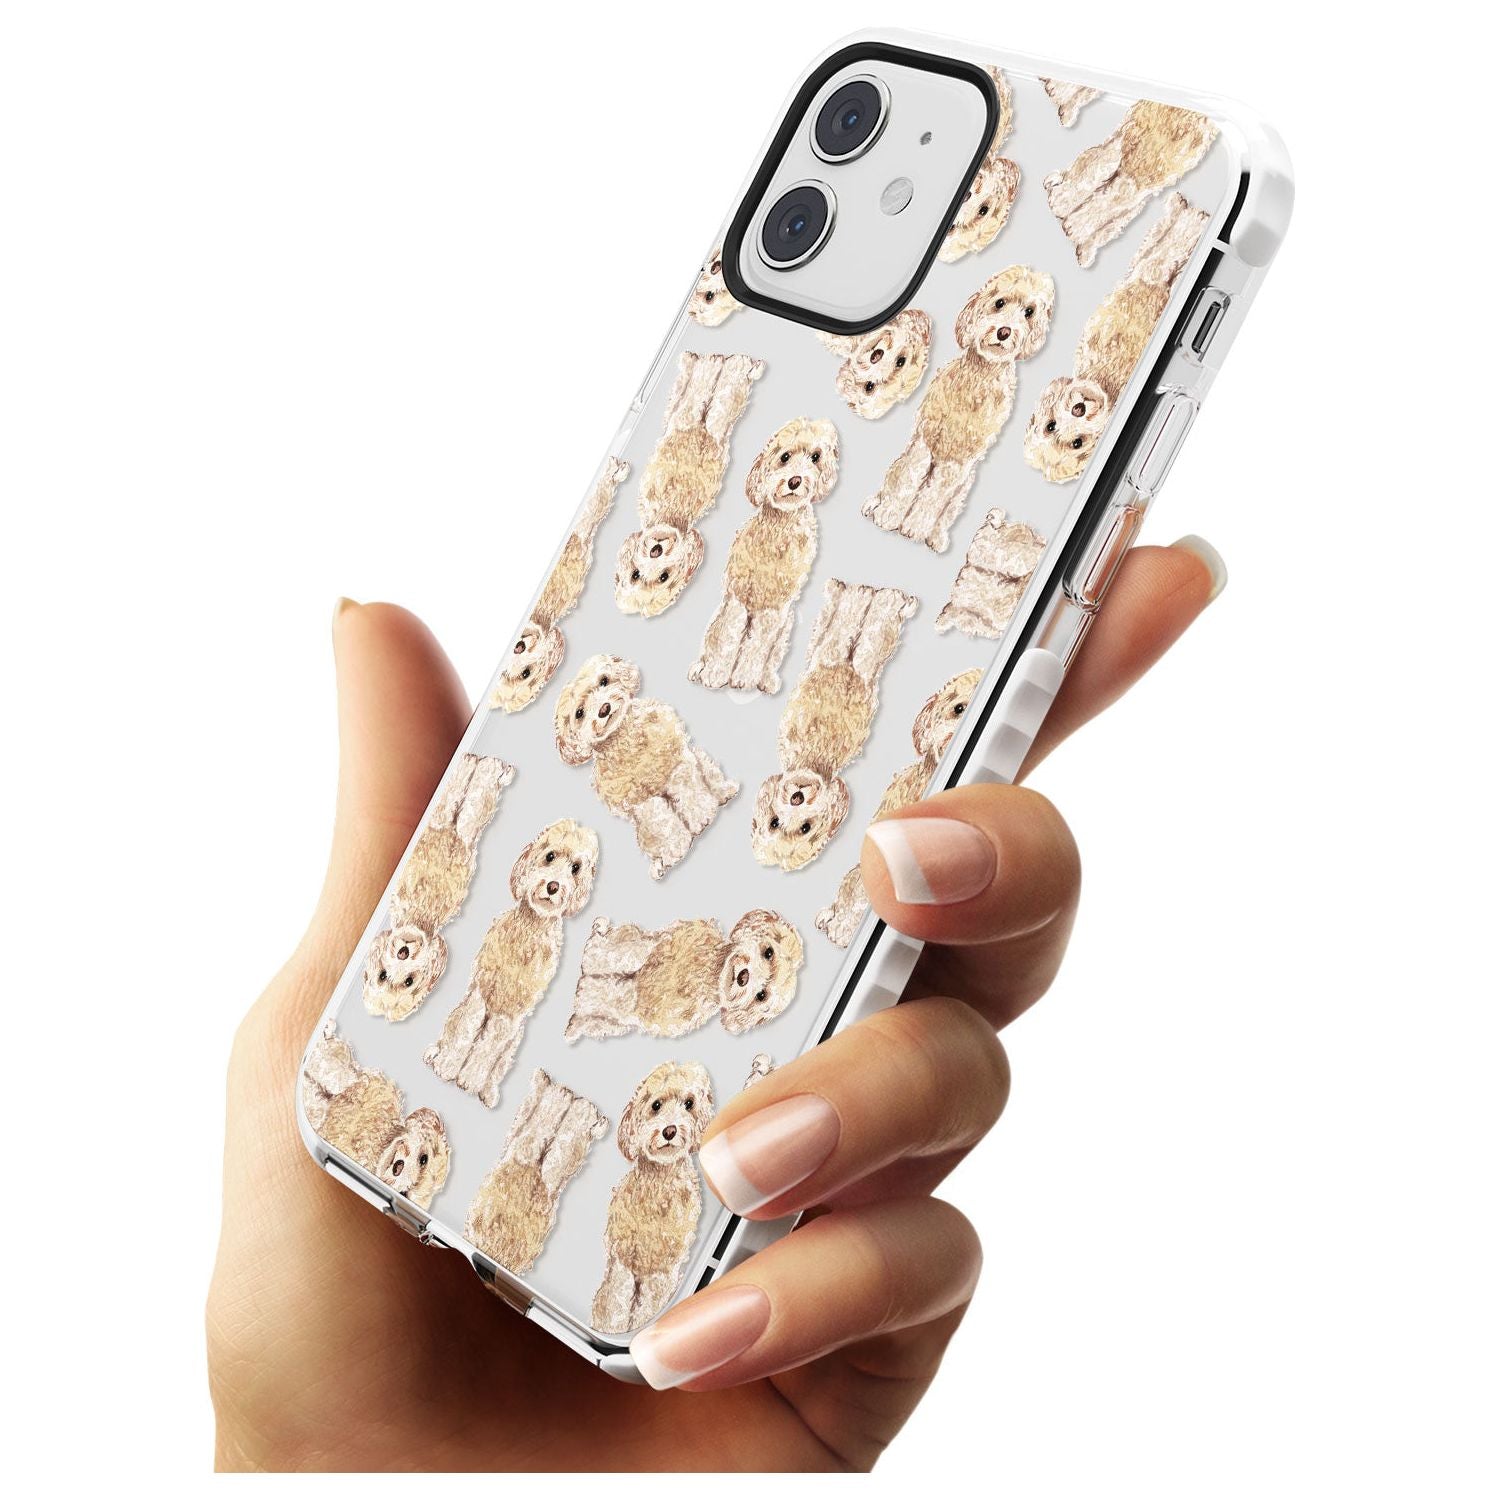 Cockapoo (Champagne) Watercolour Dog Pattern Impact Phone Case for iPhone 11